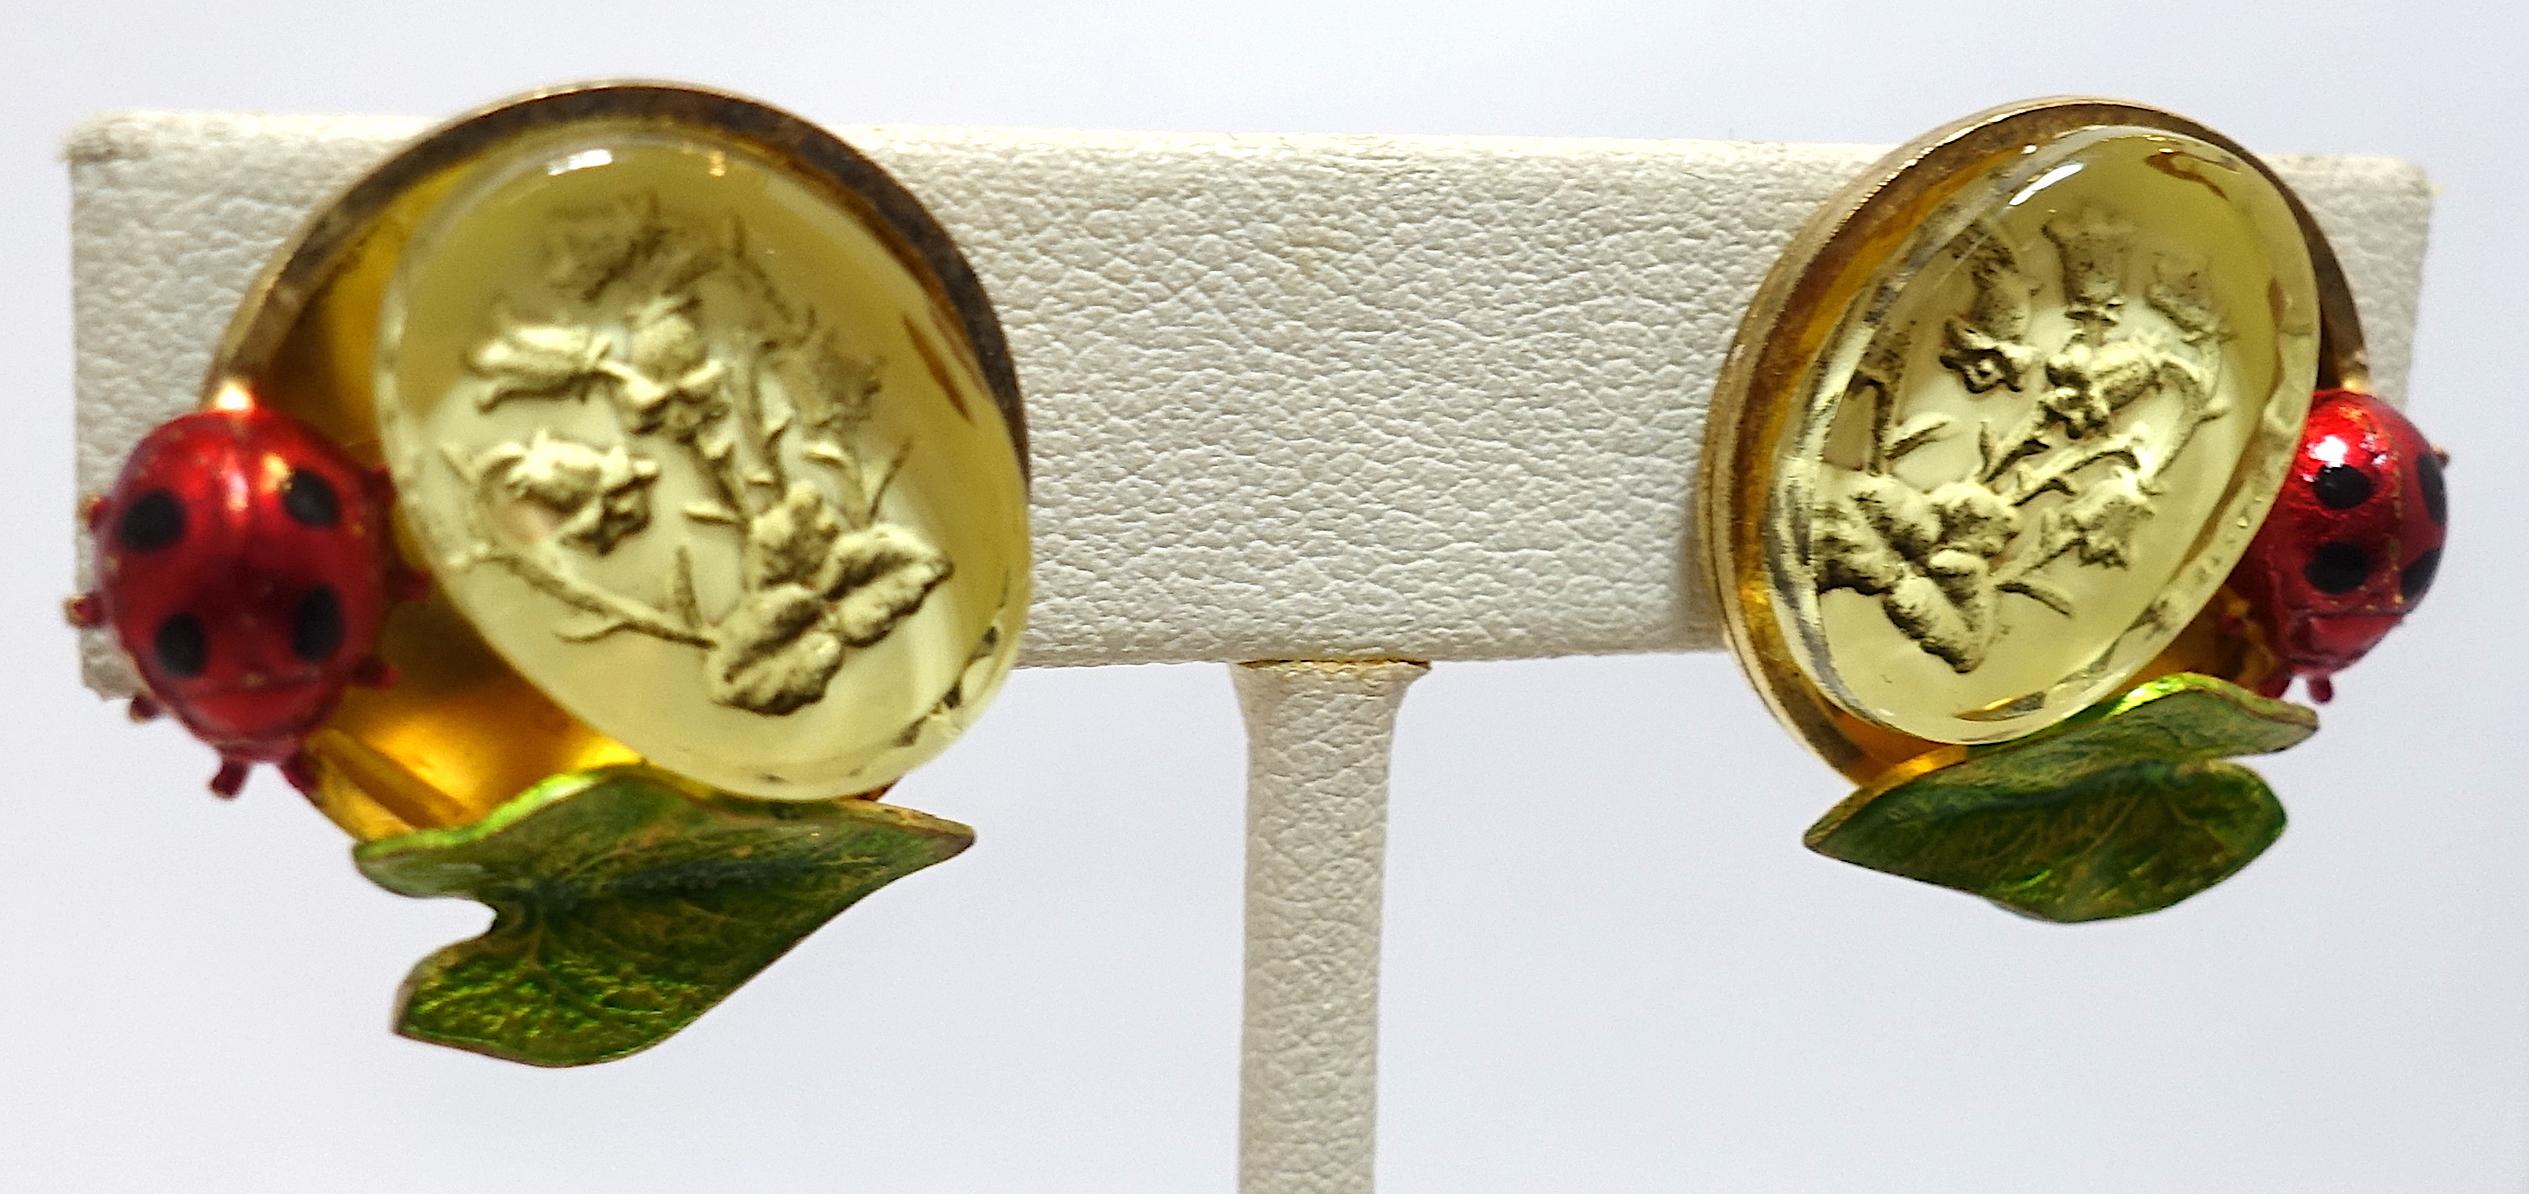 These vintage signed Claudine Vilry Paris earrings feature a floral intaglio accented by an enameled bumble bee and leaf in a gold tone setting.  These clip earrings measure 1” x 1” and are signed “Claudine Vilry Paris”. They are in excellent